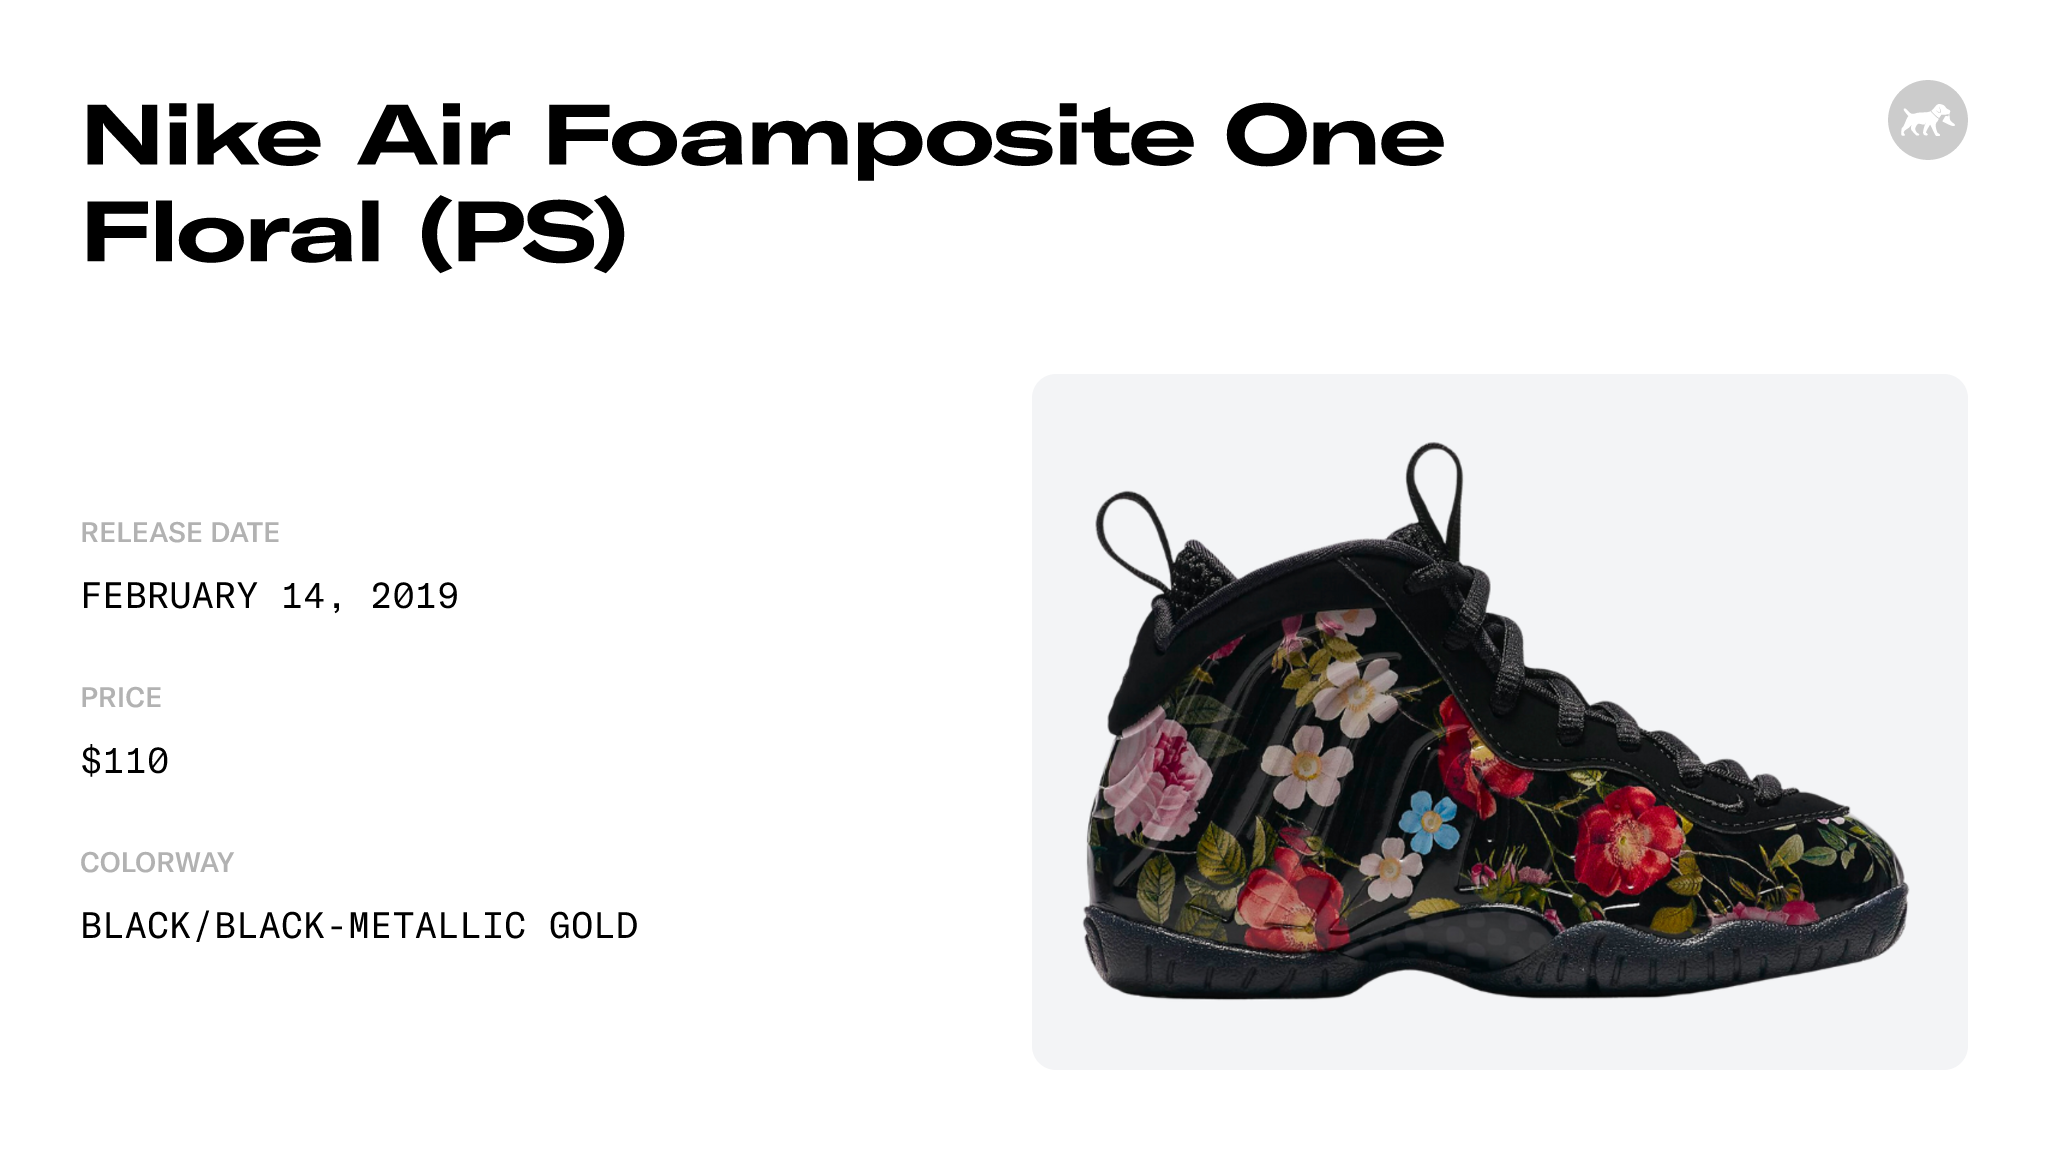 Nike Air Foamposite One Floral (PS) - AT8249-001 Raffles and Release Date